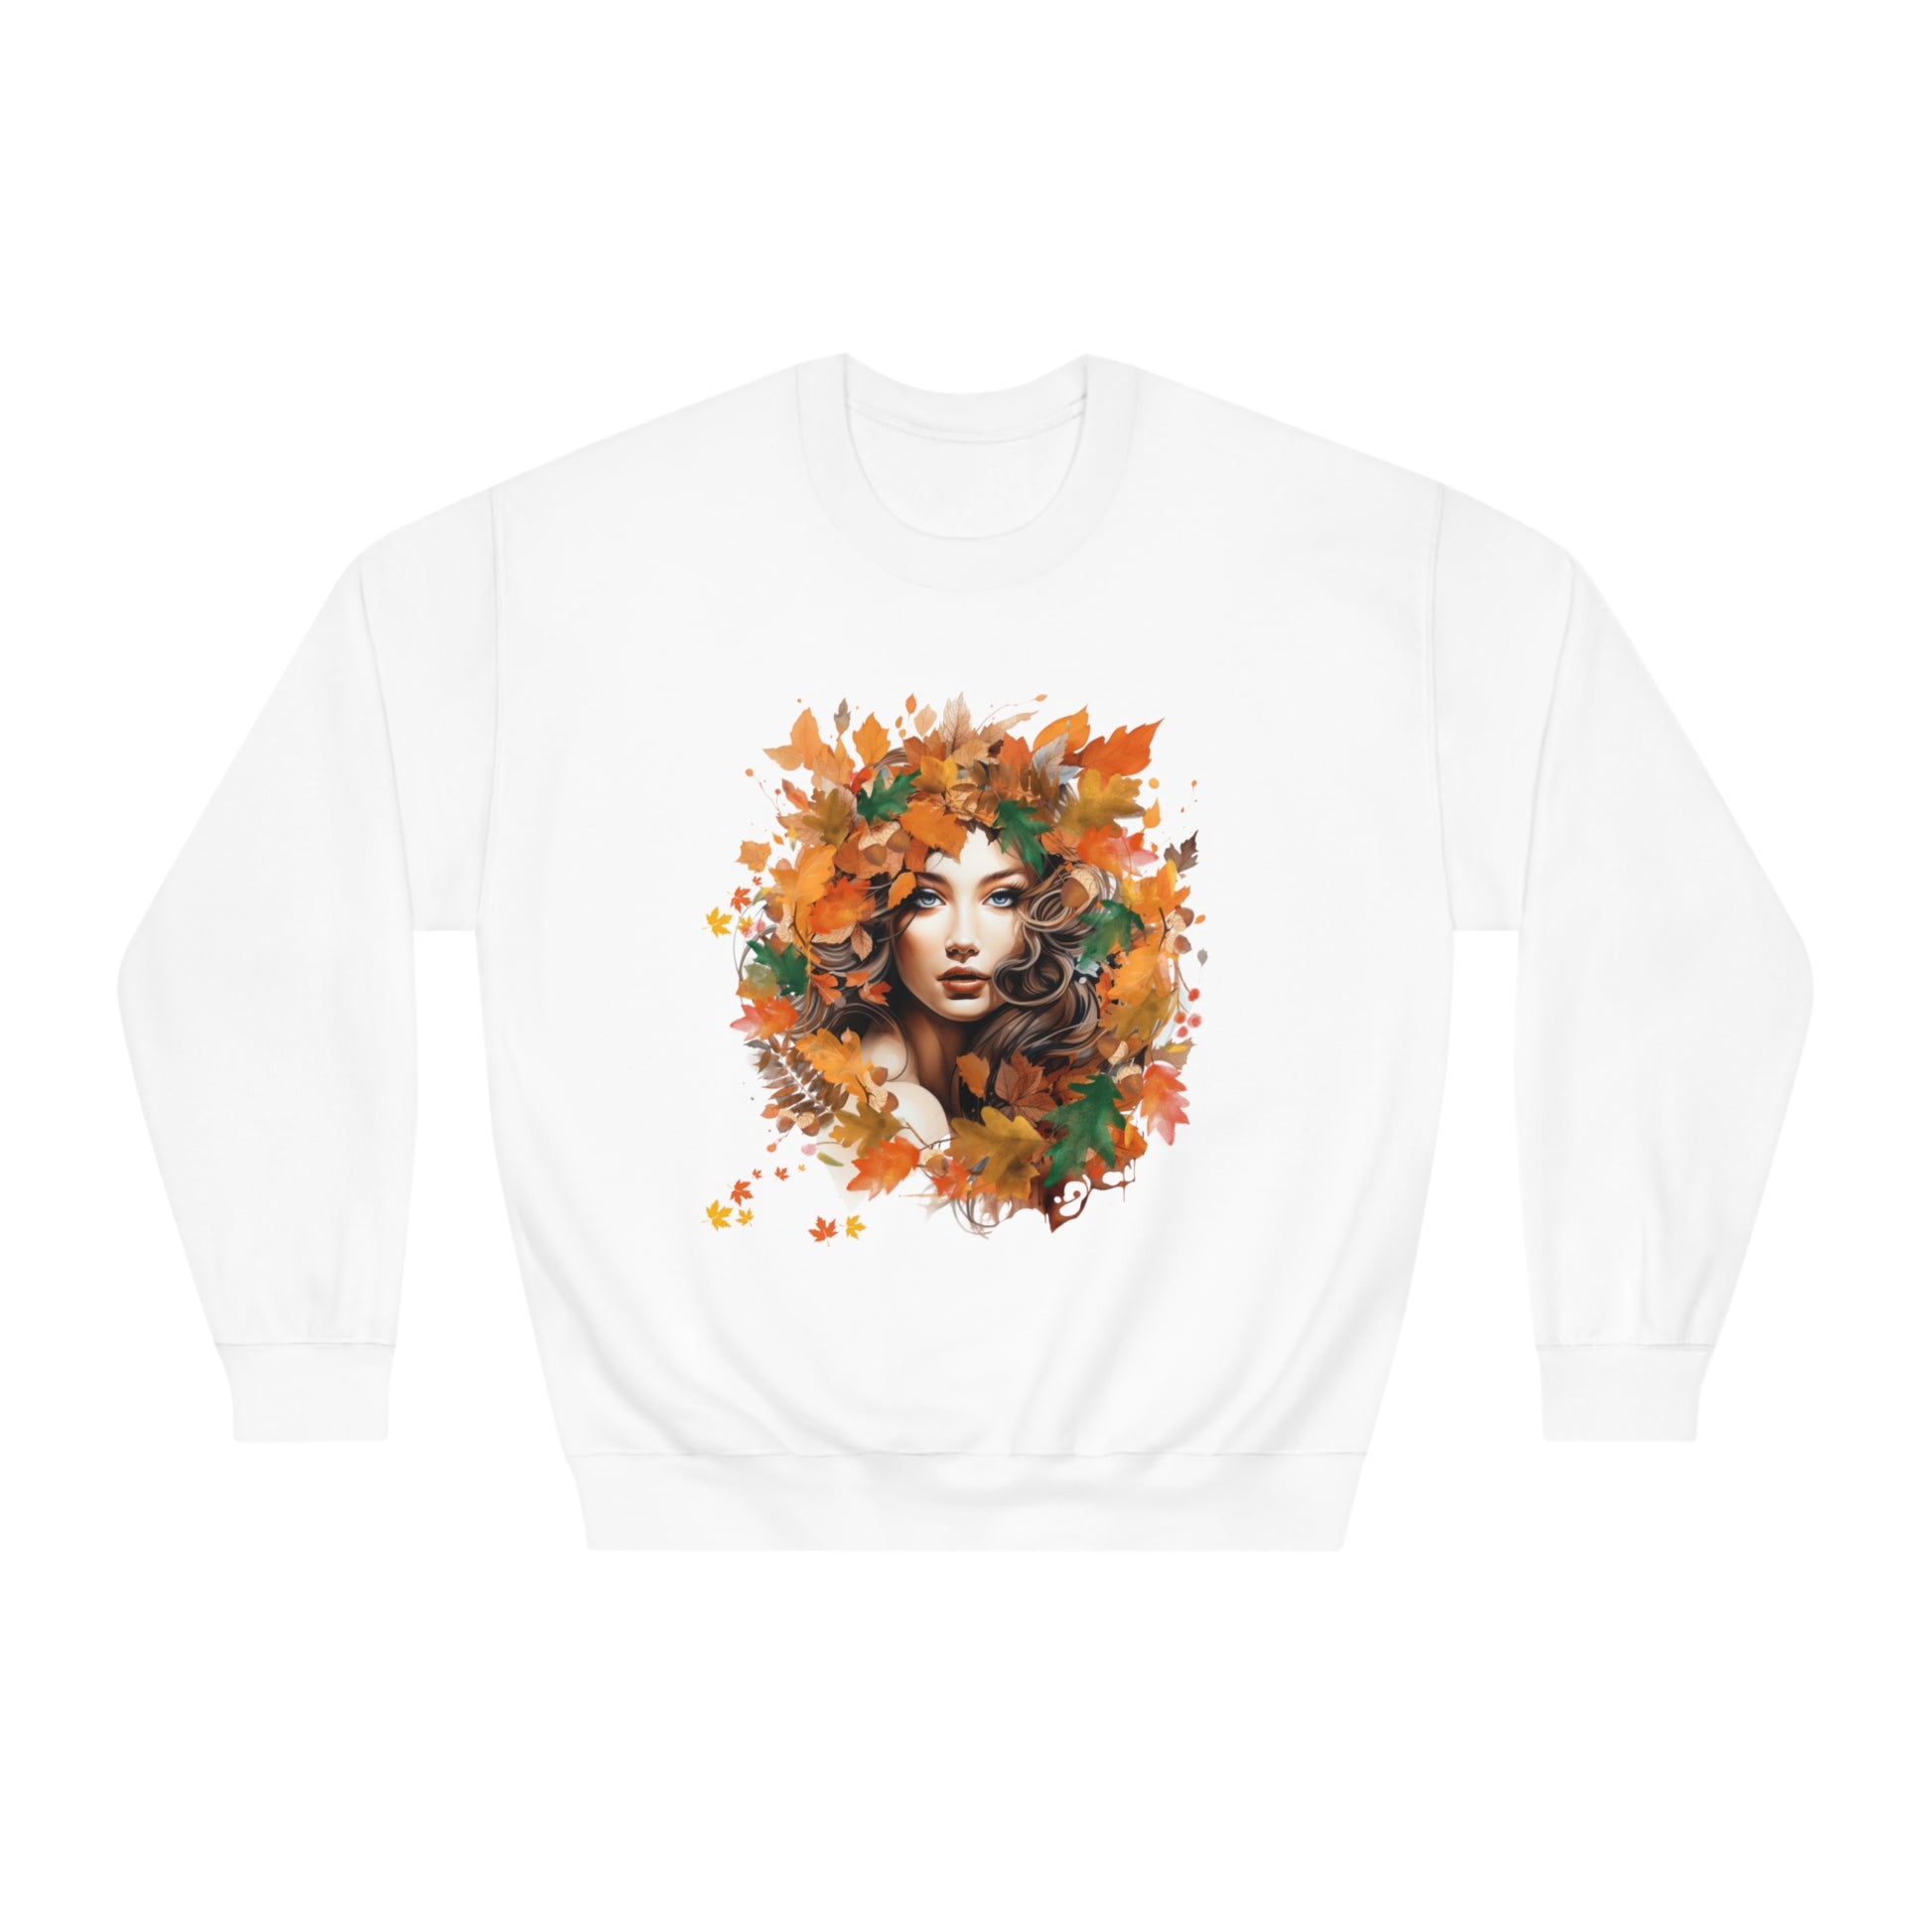 Whimsical Dreams in Autumn Hues: Romantic Dreamy Female Surrounded by Autumn Leaves Sweatshirt - Fairycore, Forestcore, Cottagecore-inspired Fashion Sweatshirt White S 